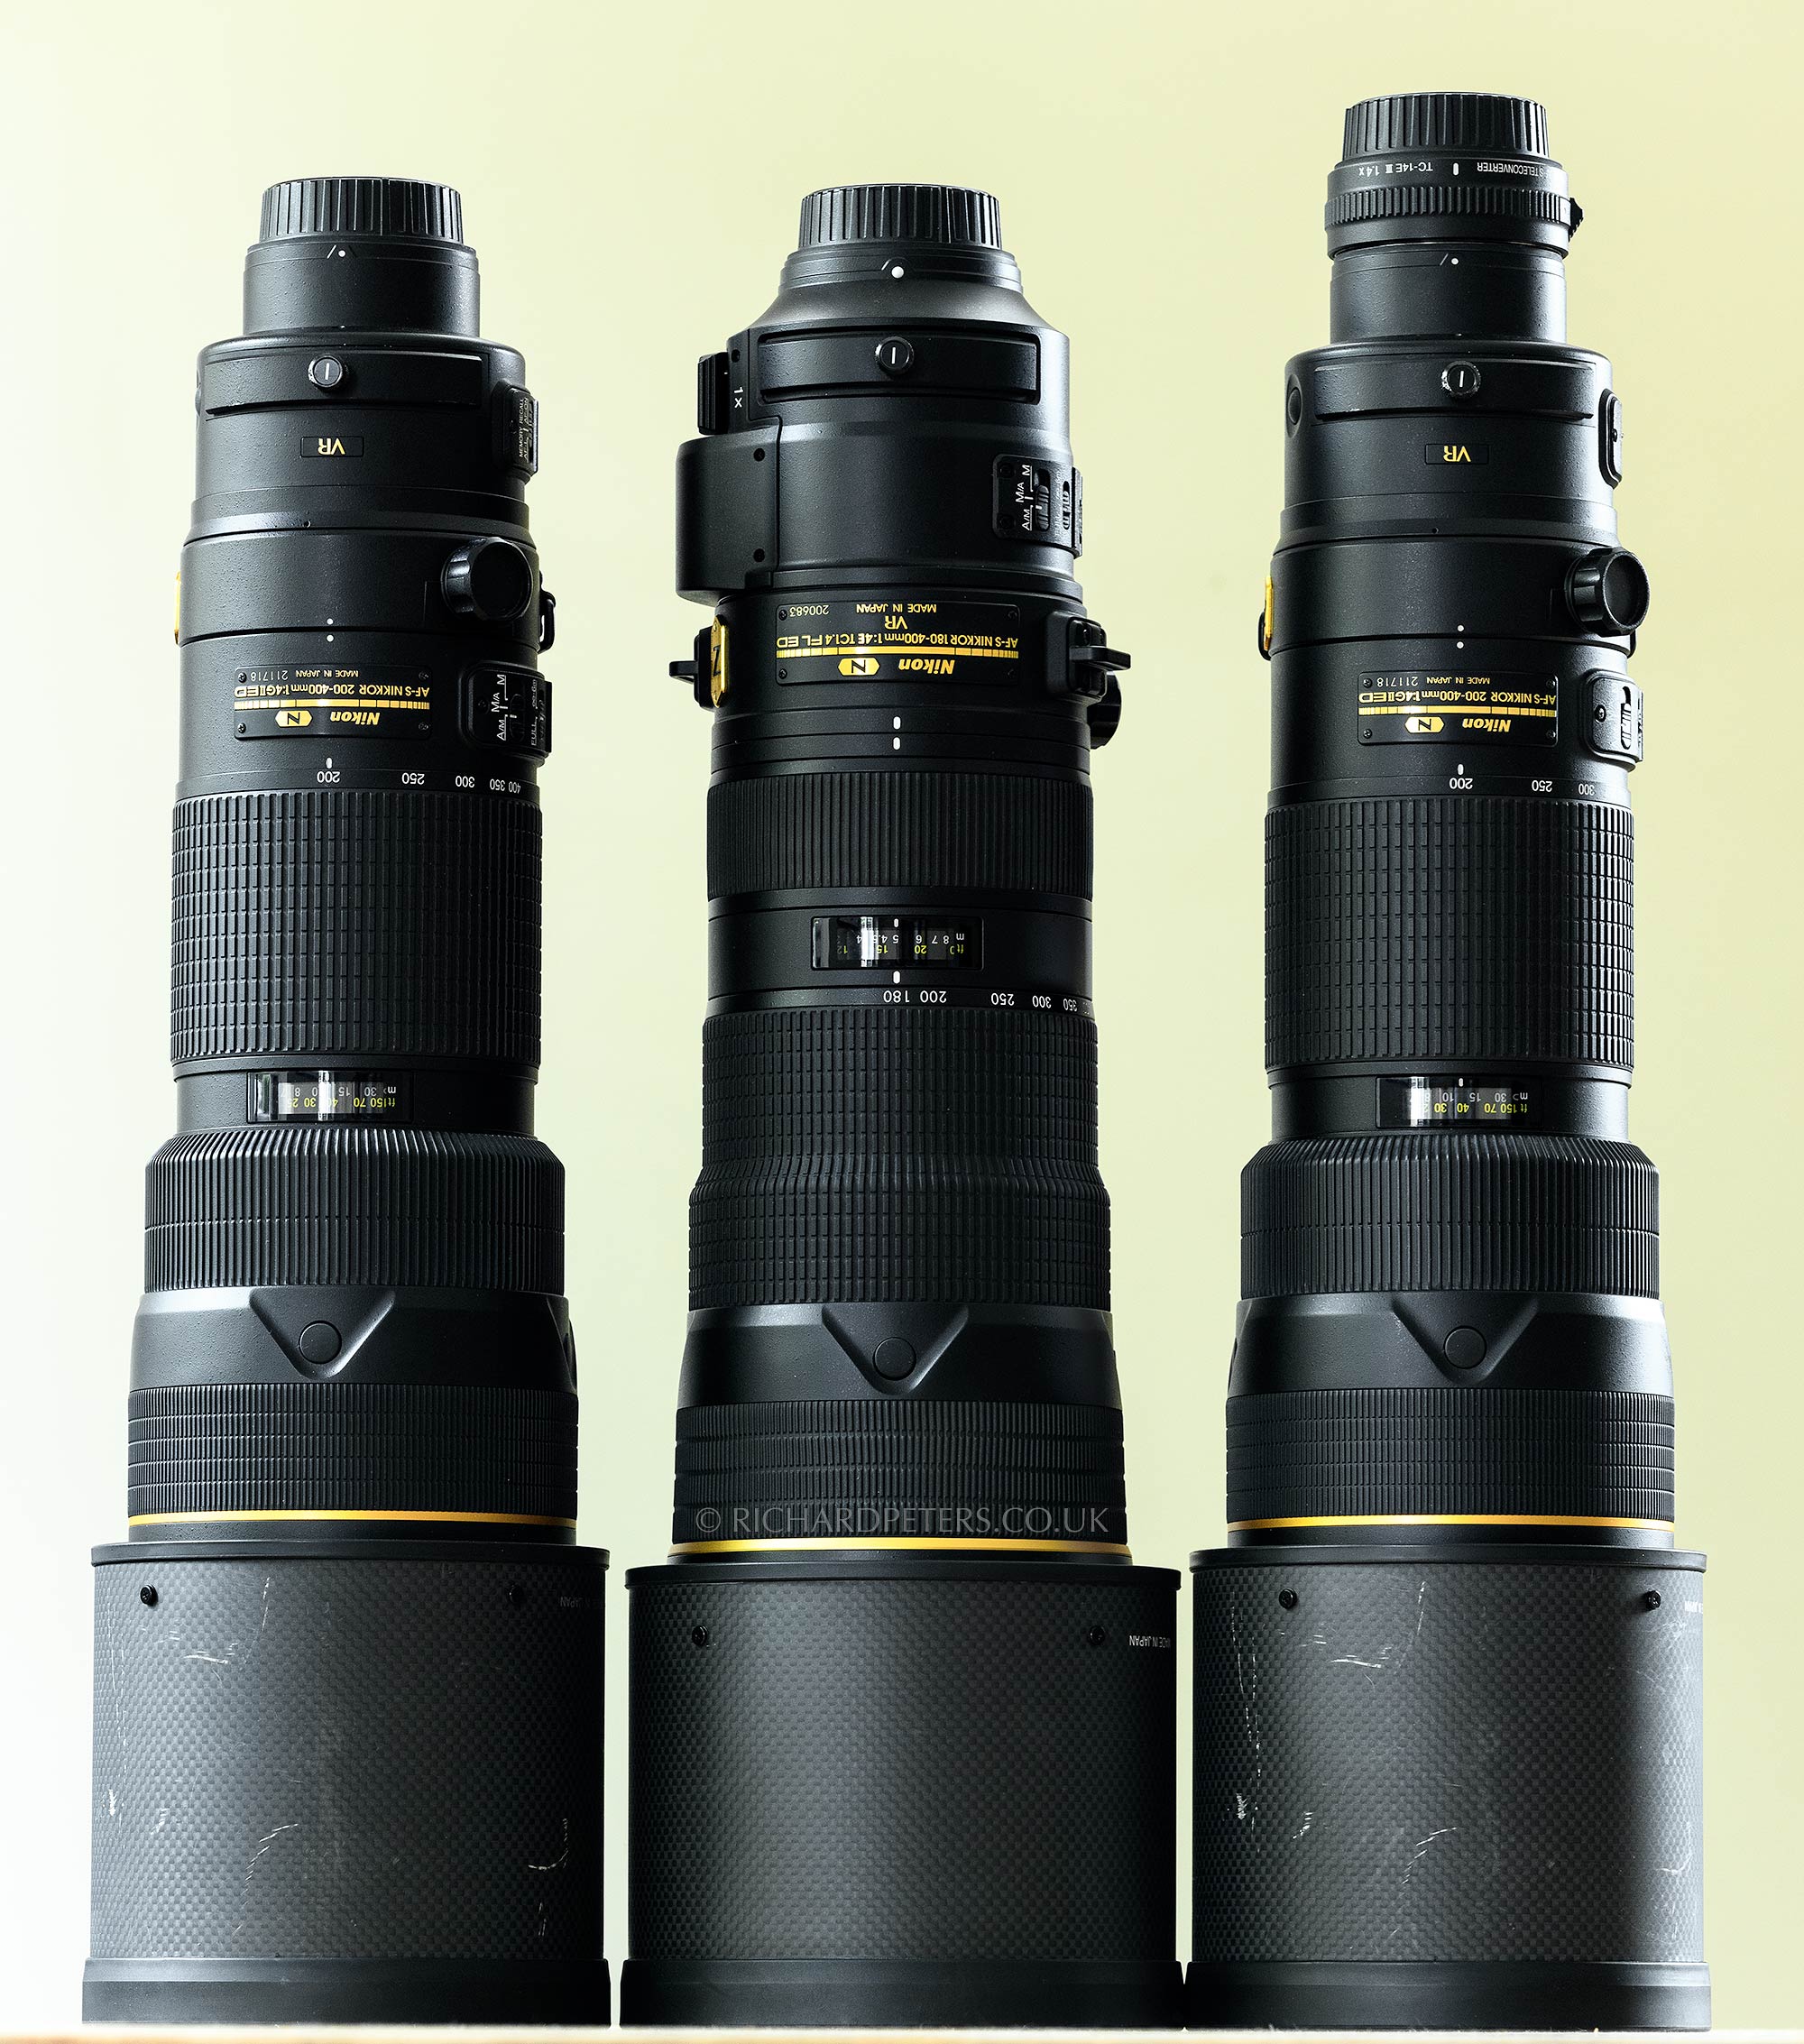 180-400 flanked by 200-400 with and without TC-14EIII